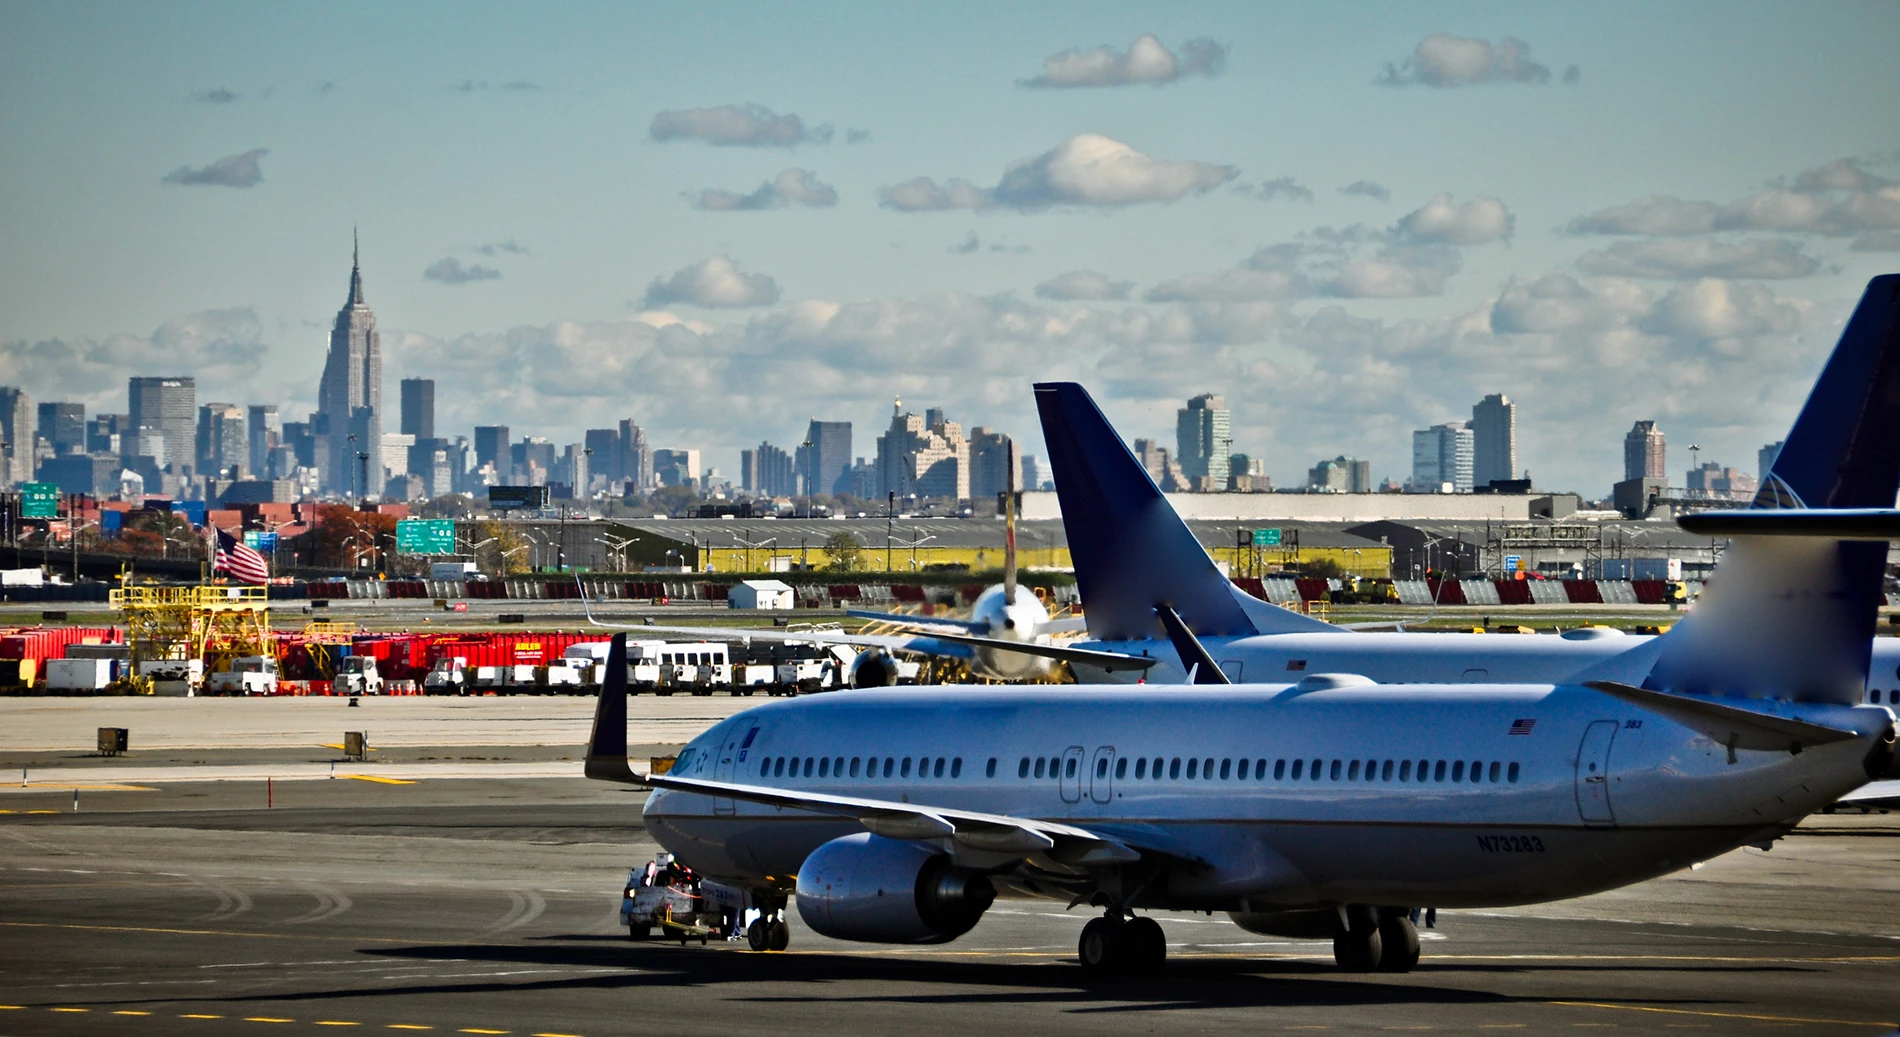 Planes taxiing in front of the New Jersy/New York skyline, impacted by Hurricane Ida and part of Apex's storm damage assessment.